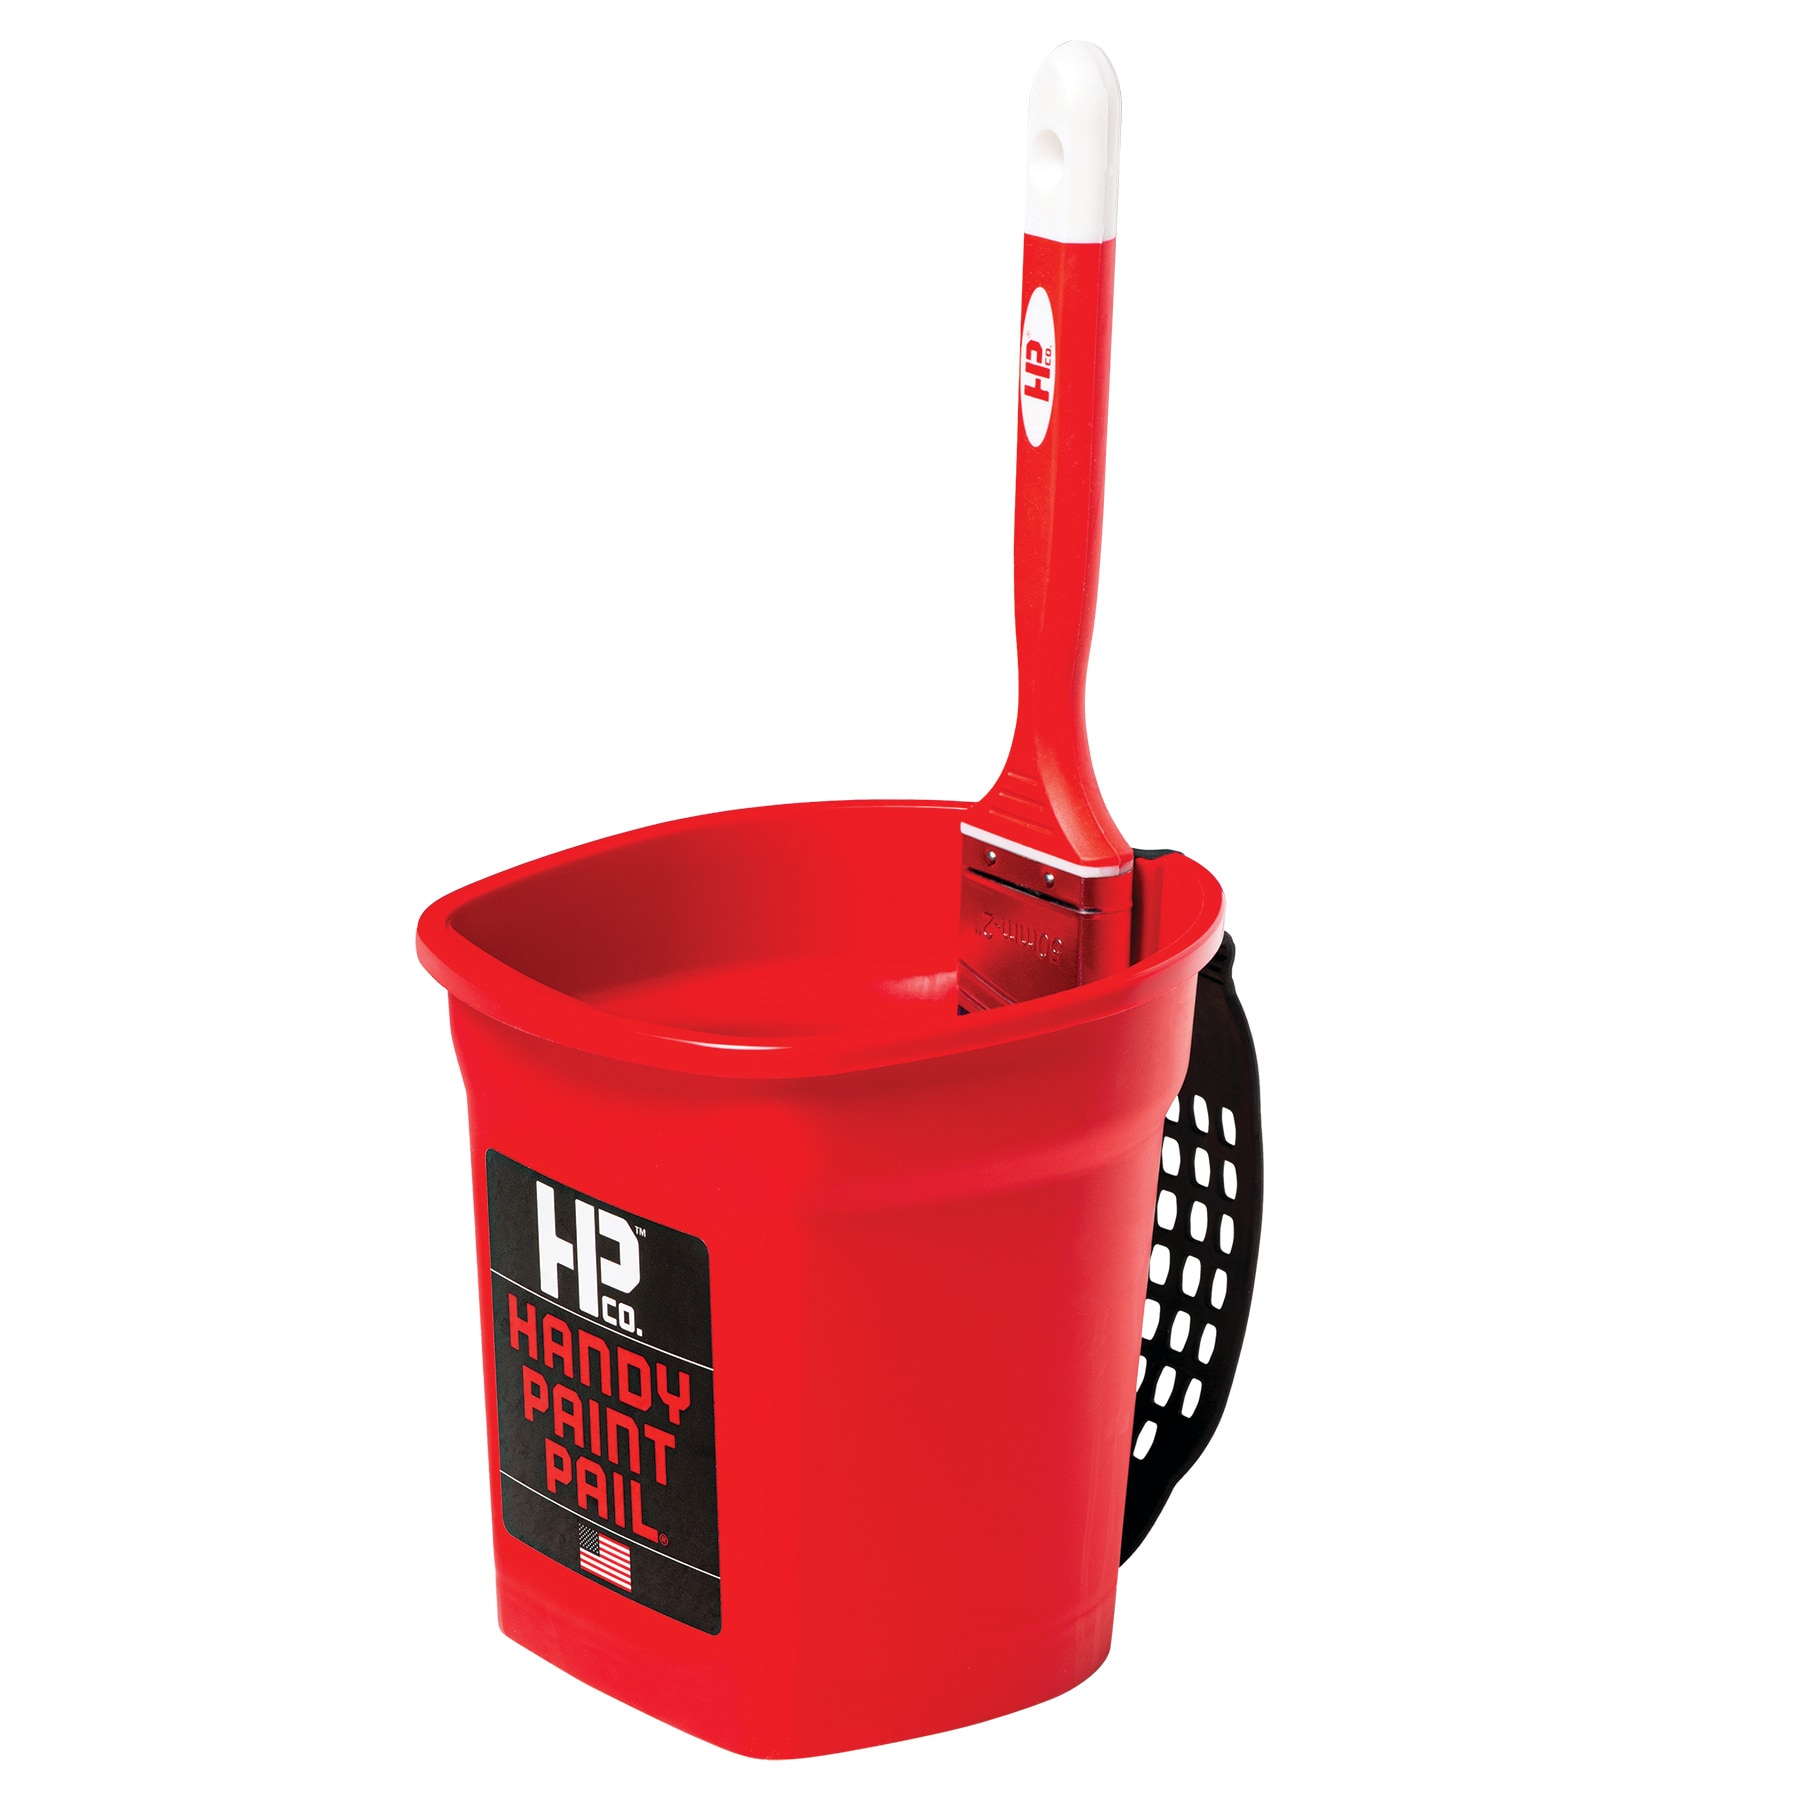 Handy Pail with Brush Clip